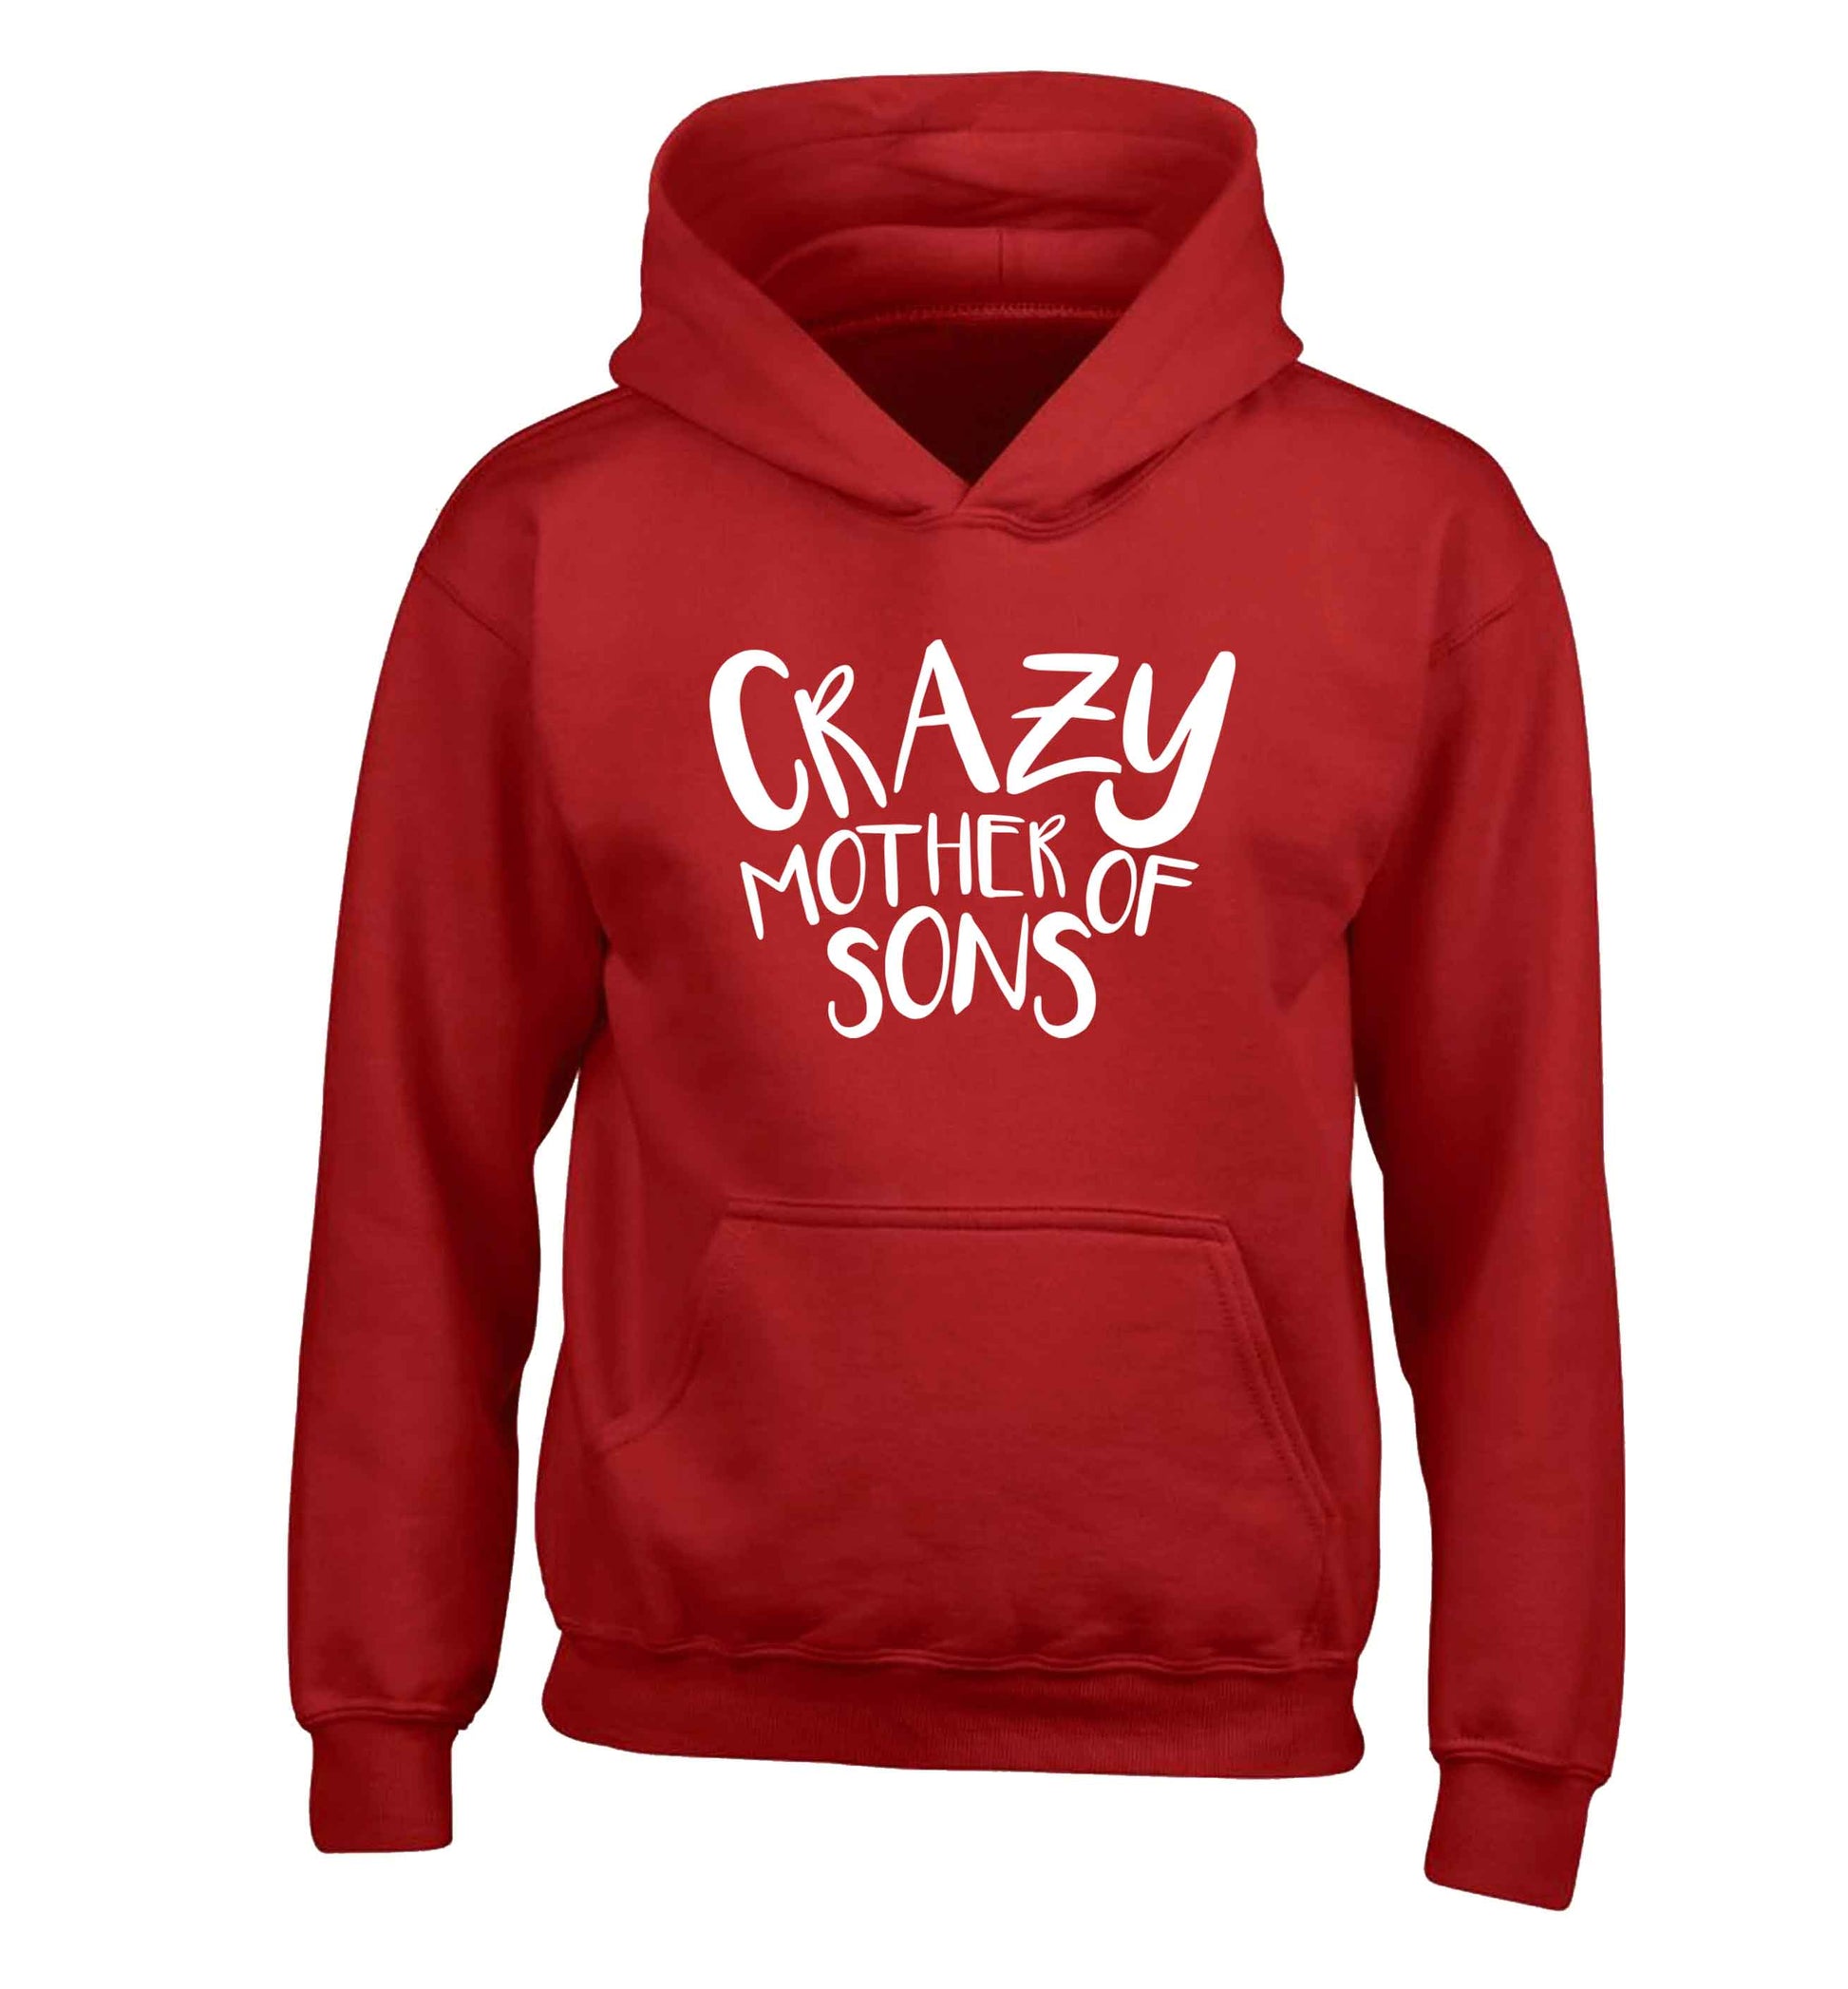 Crazy mother of sons children's red hoodie 12-13 Years